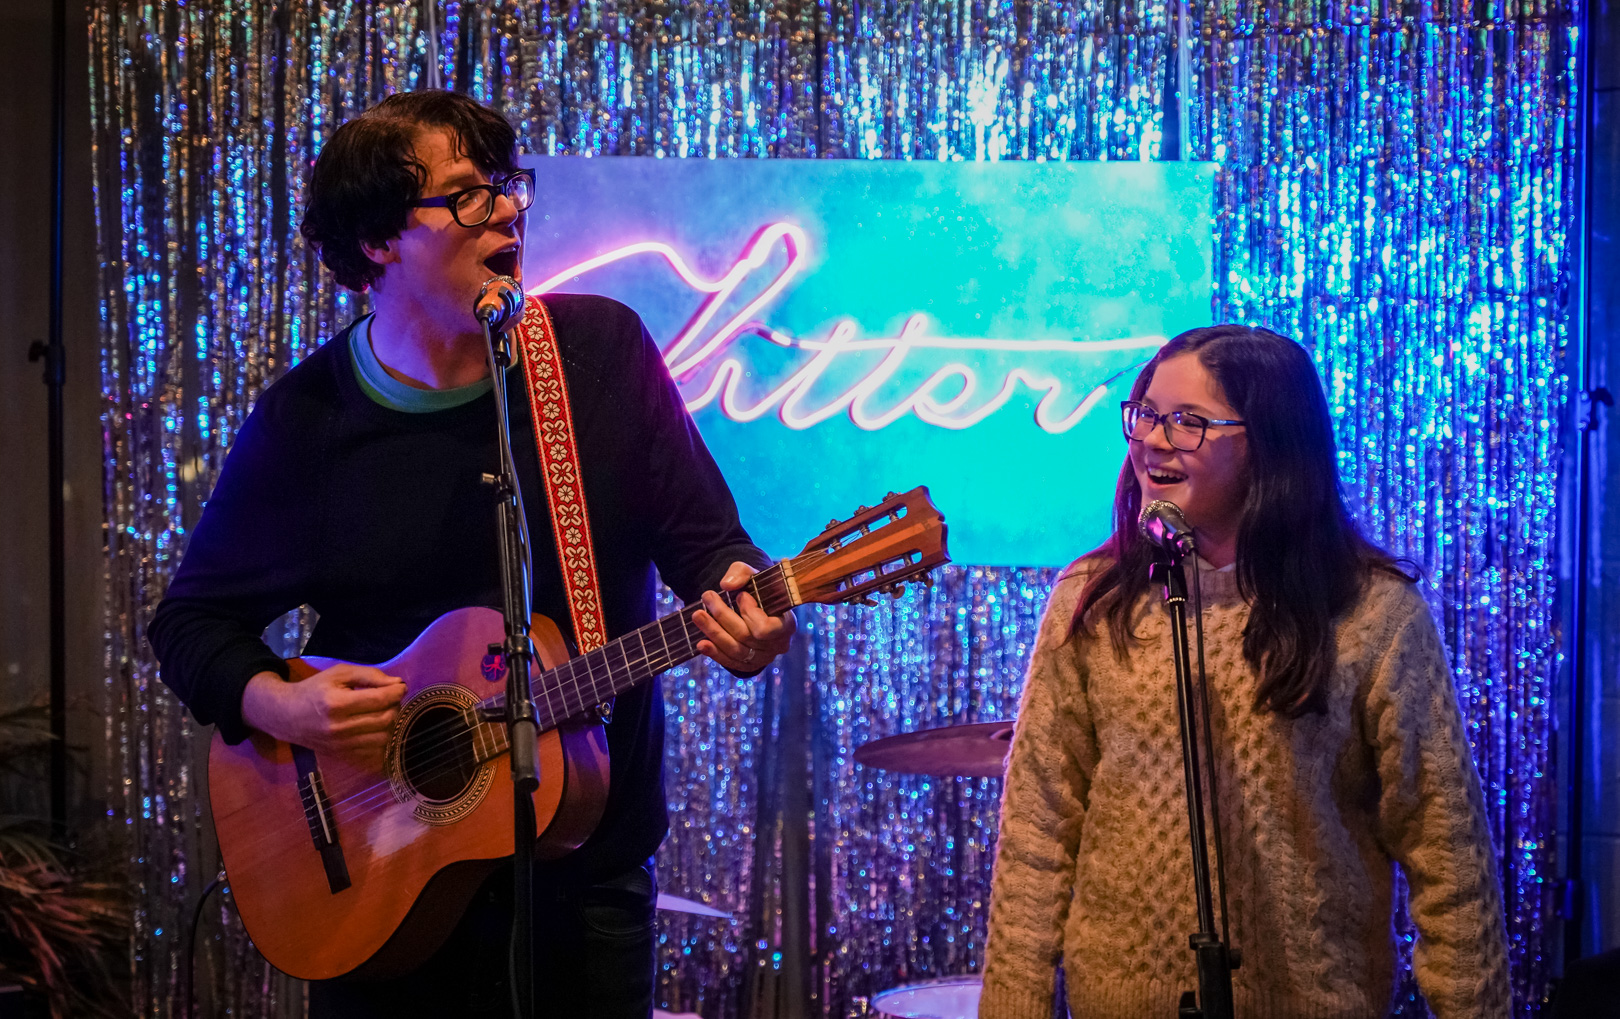 A father and daughter playing music and singing on stage